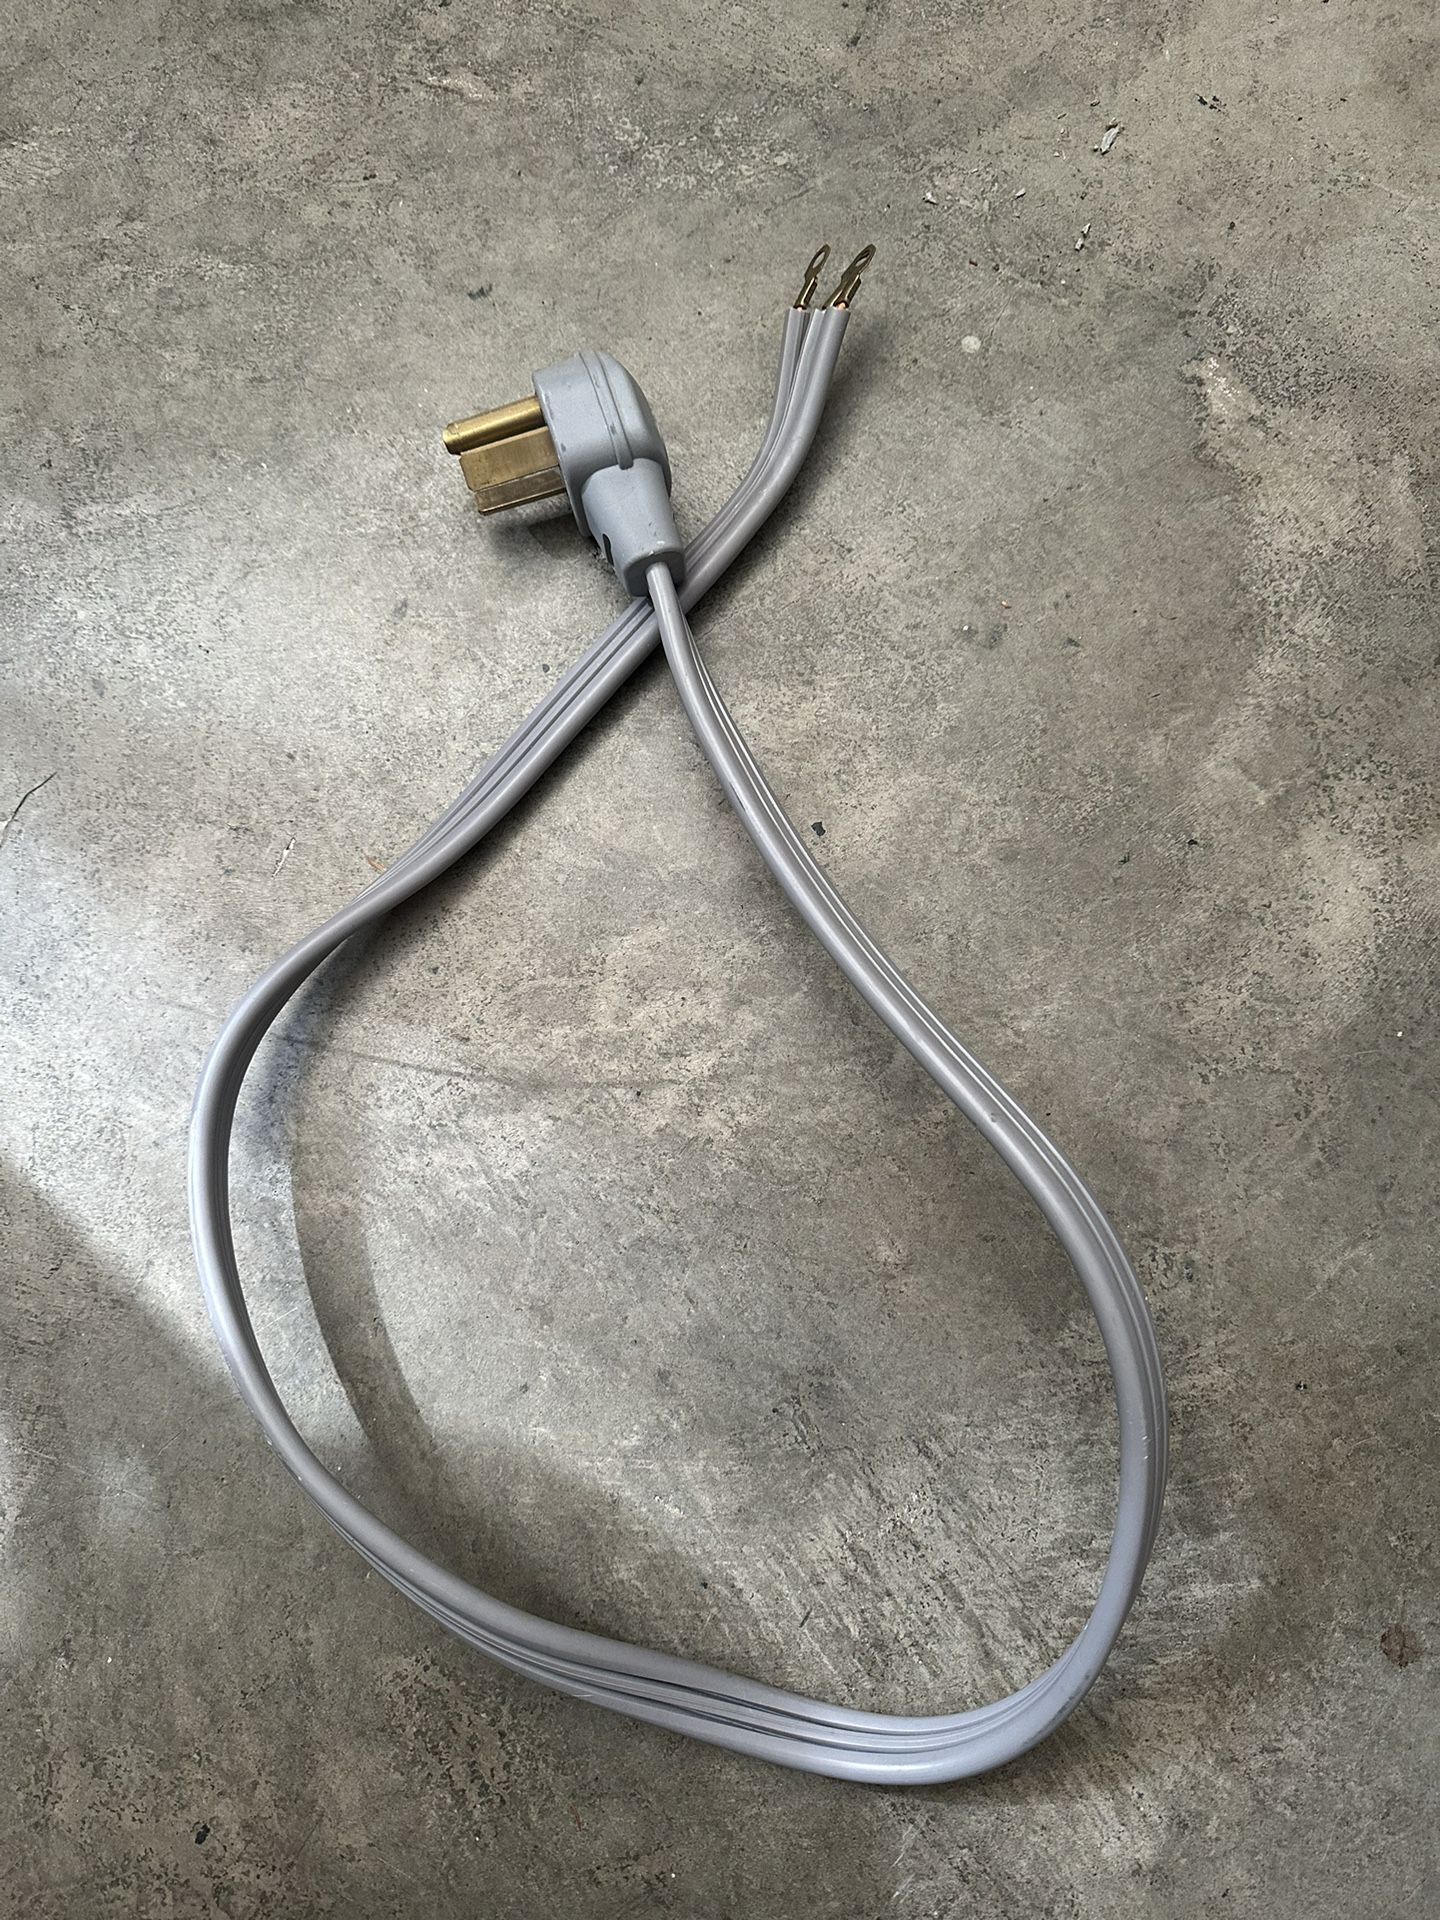 General Electric (GE) 3 Prong Dryer Power Cord 